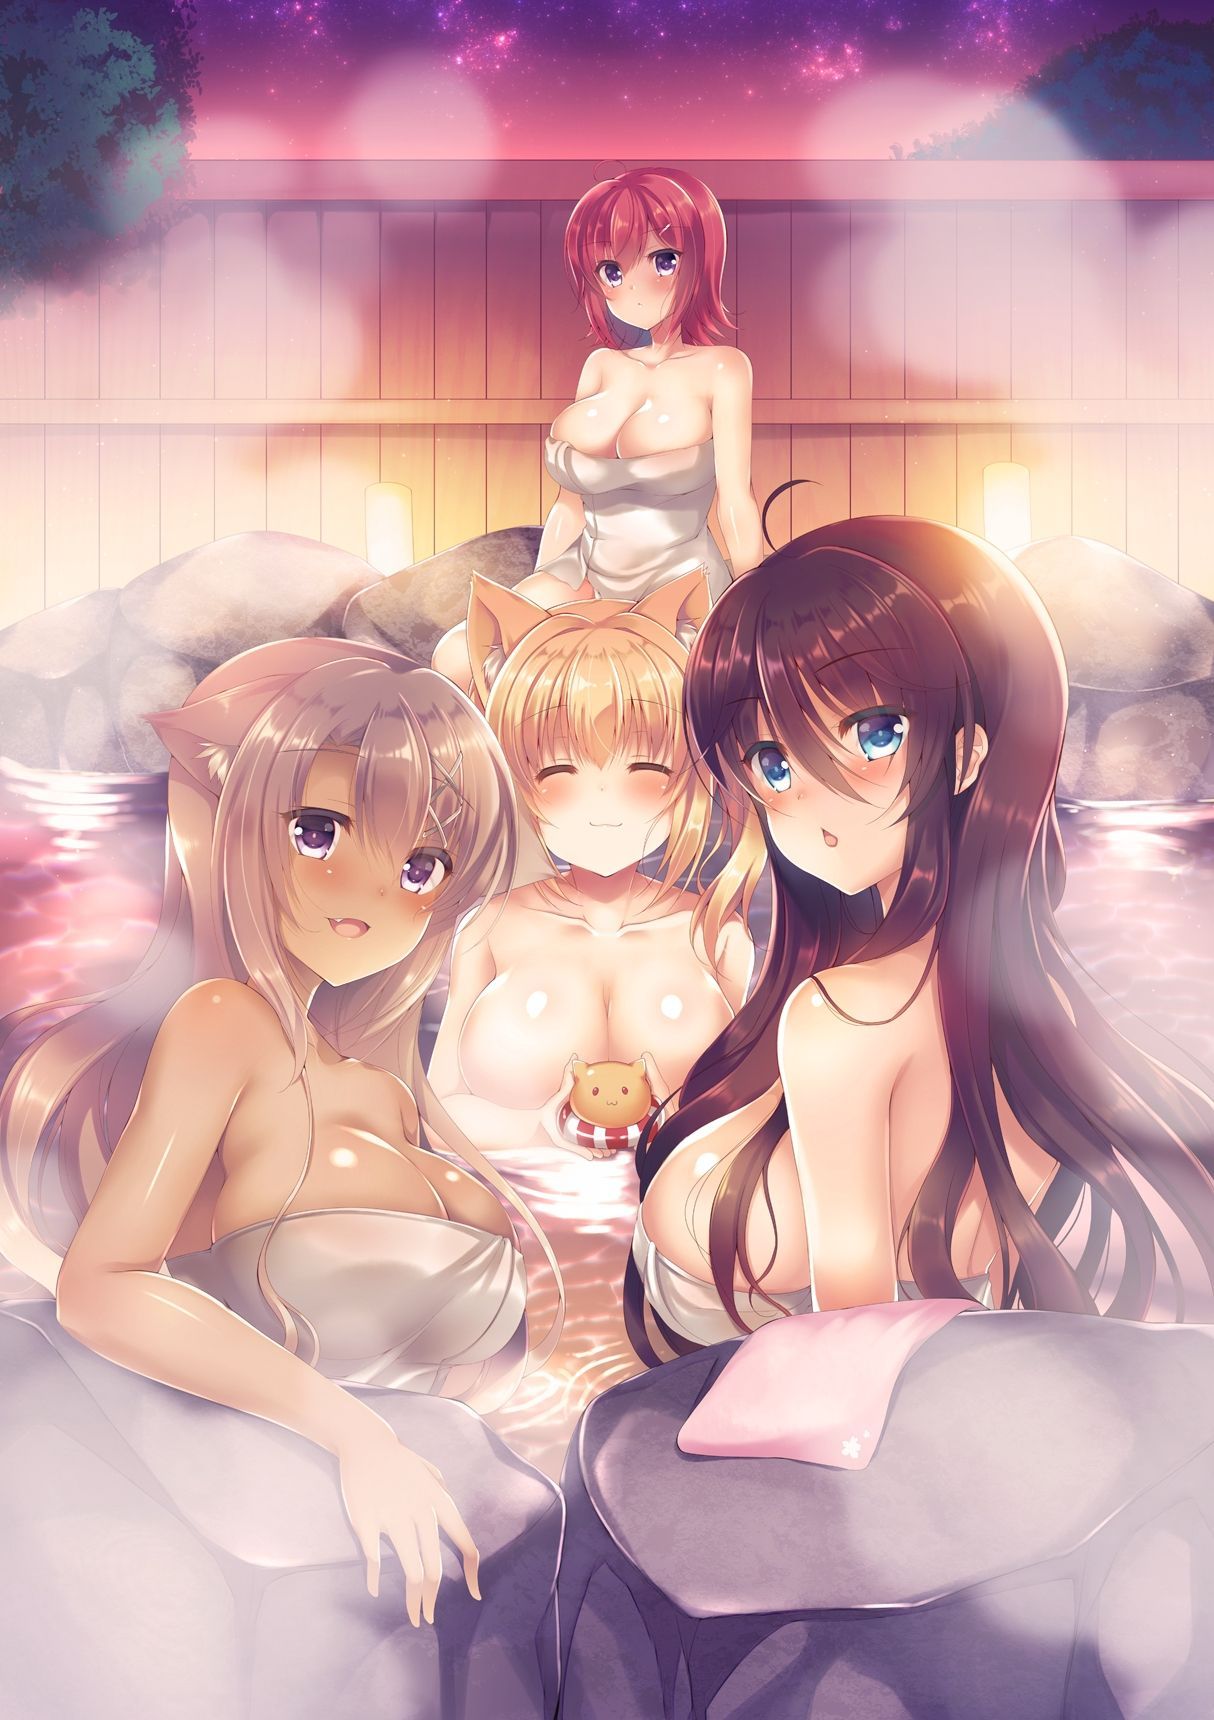 Erotic anime summary Beautiful girls relaxing in baths and hot springs [secondary erotic] 15